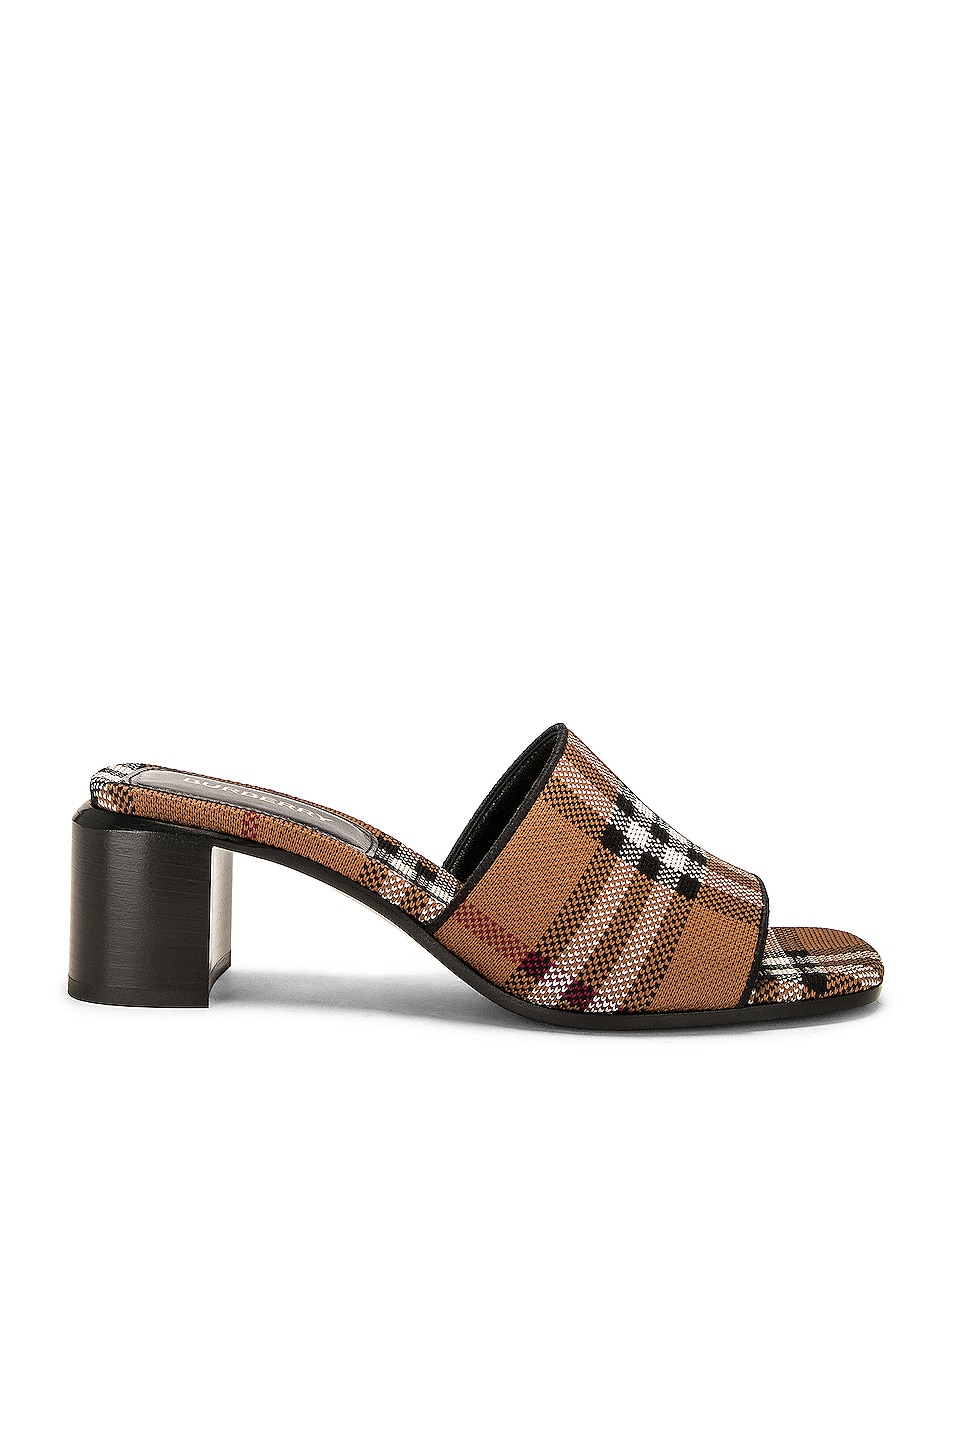 Image 1 of Burberry Wilma Sandal in Dark Birch Brown Check